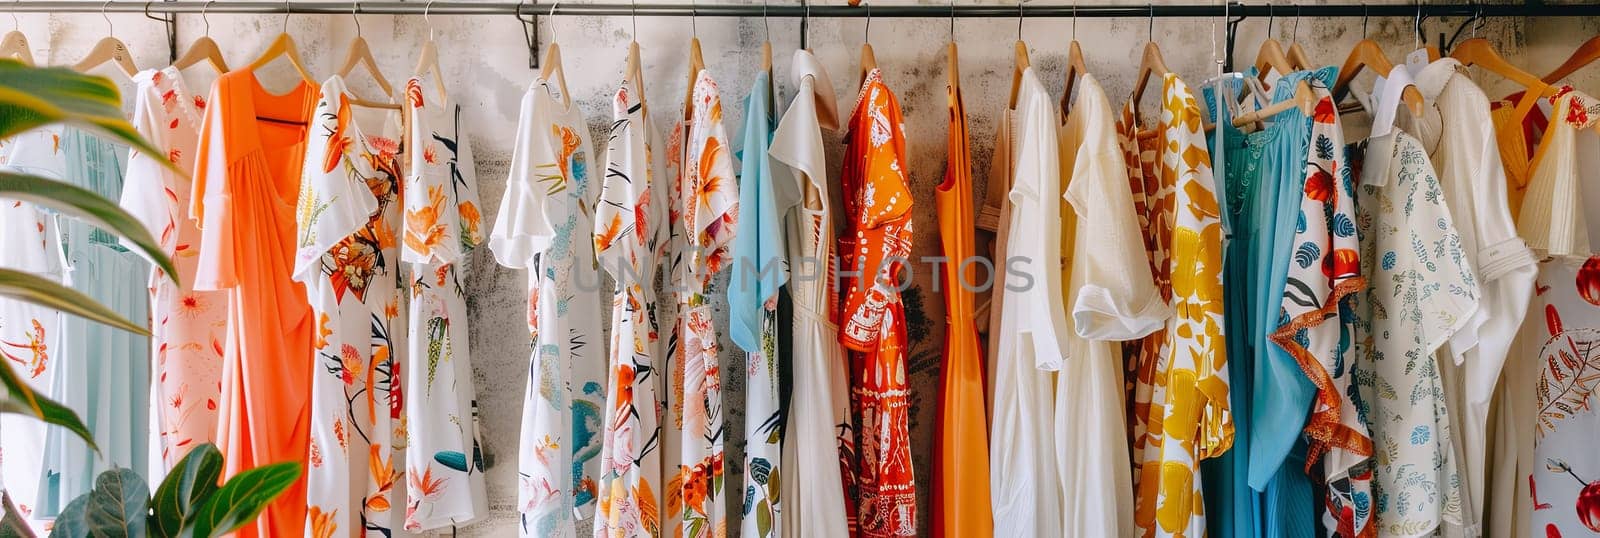 Fashionable scarves neatly organized and displayed on a wall rack in a womens closet.